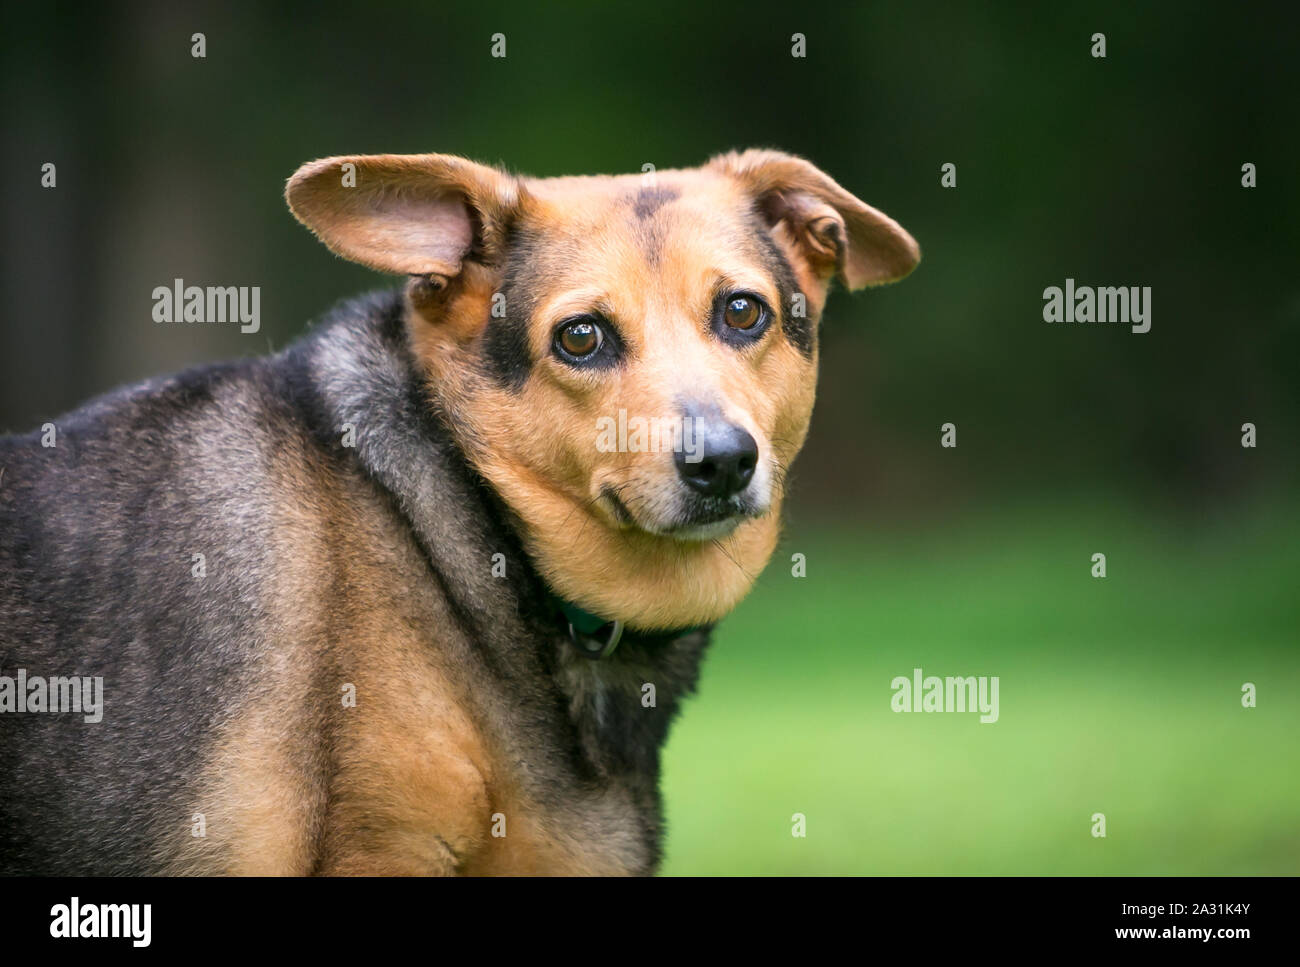 A severely overweight Welsh Corgi mixed breed dog with floppy ears Stock Photo